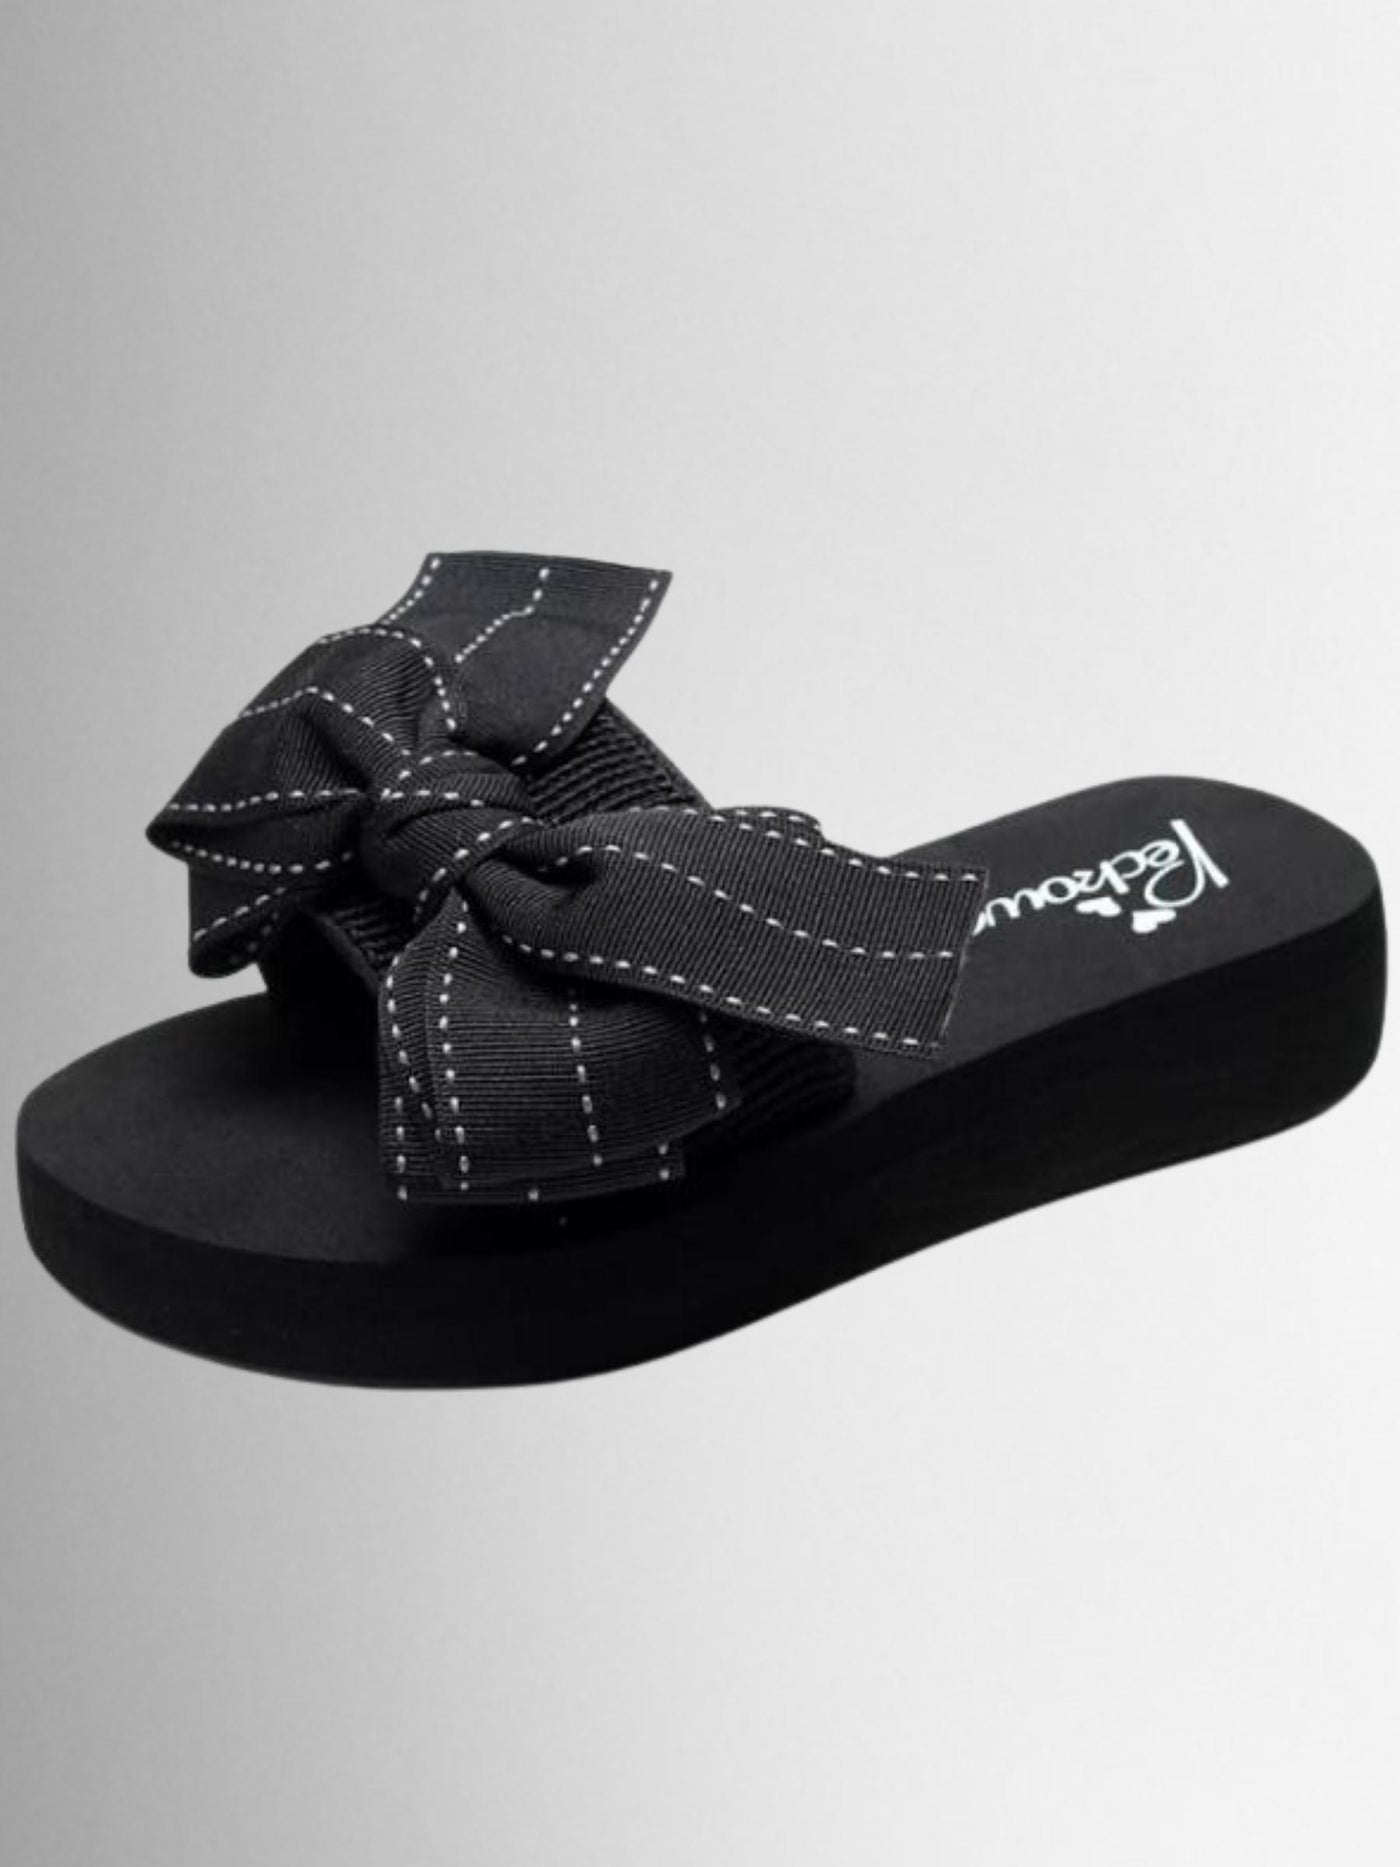 Mia Belle Girls Bow Slides | Shoes By Liv and Mia